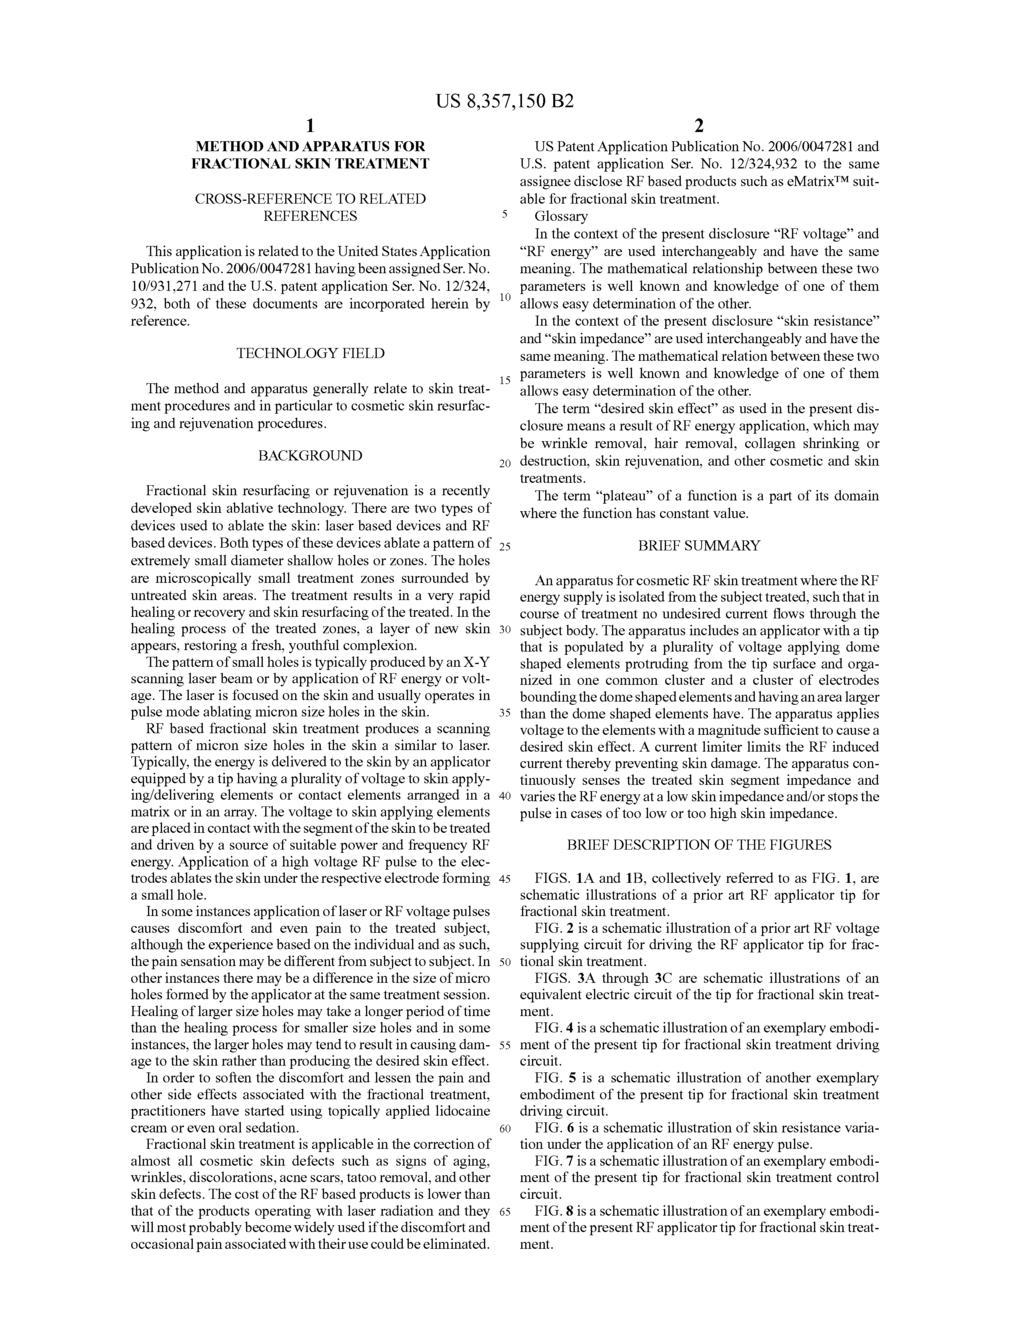 1. METHOD AND APPARATUS FOR FRACTIONAL SKIN TREATMENT CROSS-REFERENCE TO RELATED REFERENCES This application is related to the United States Application Publication No.